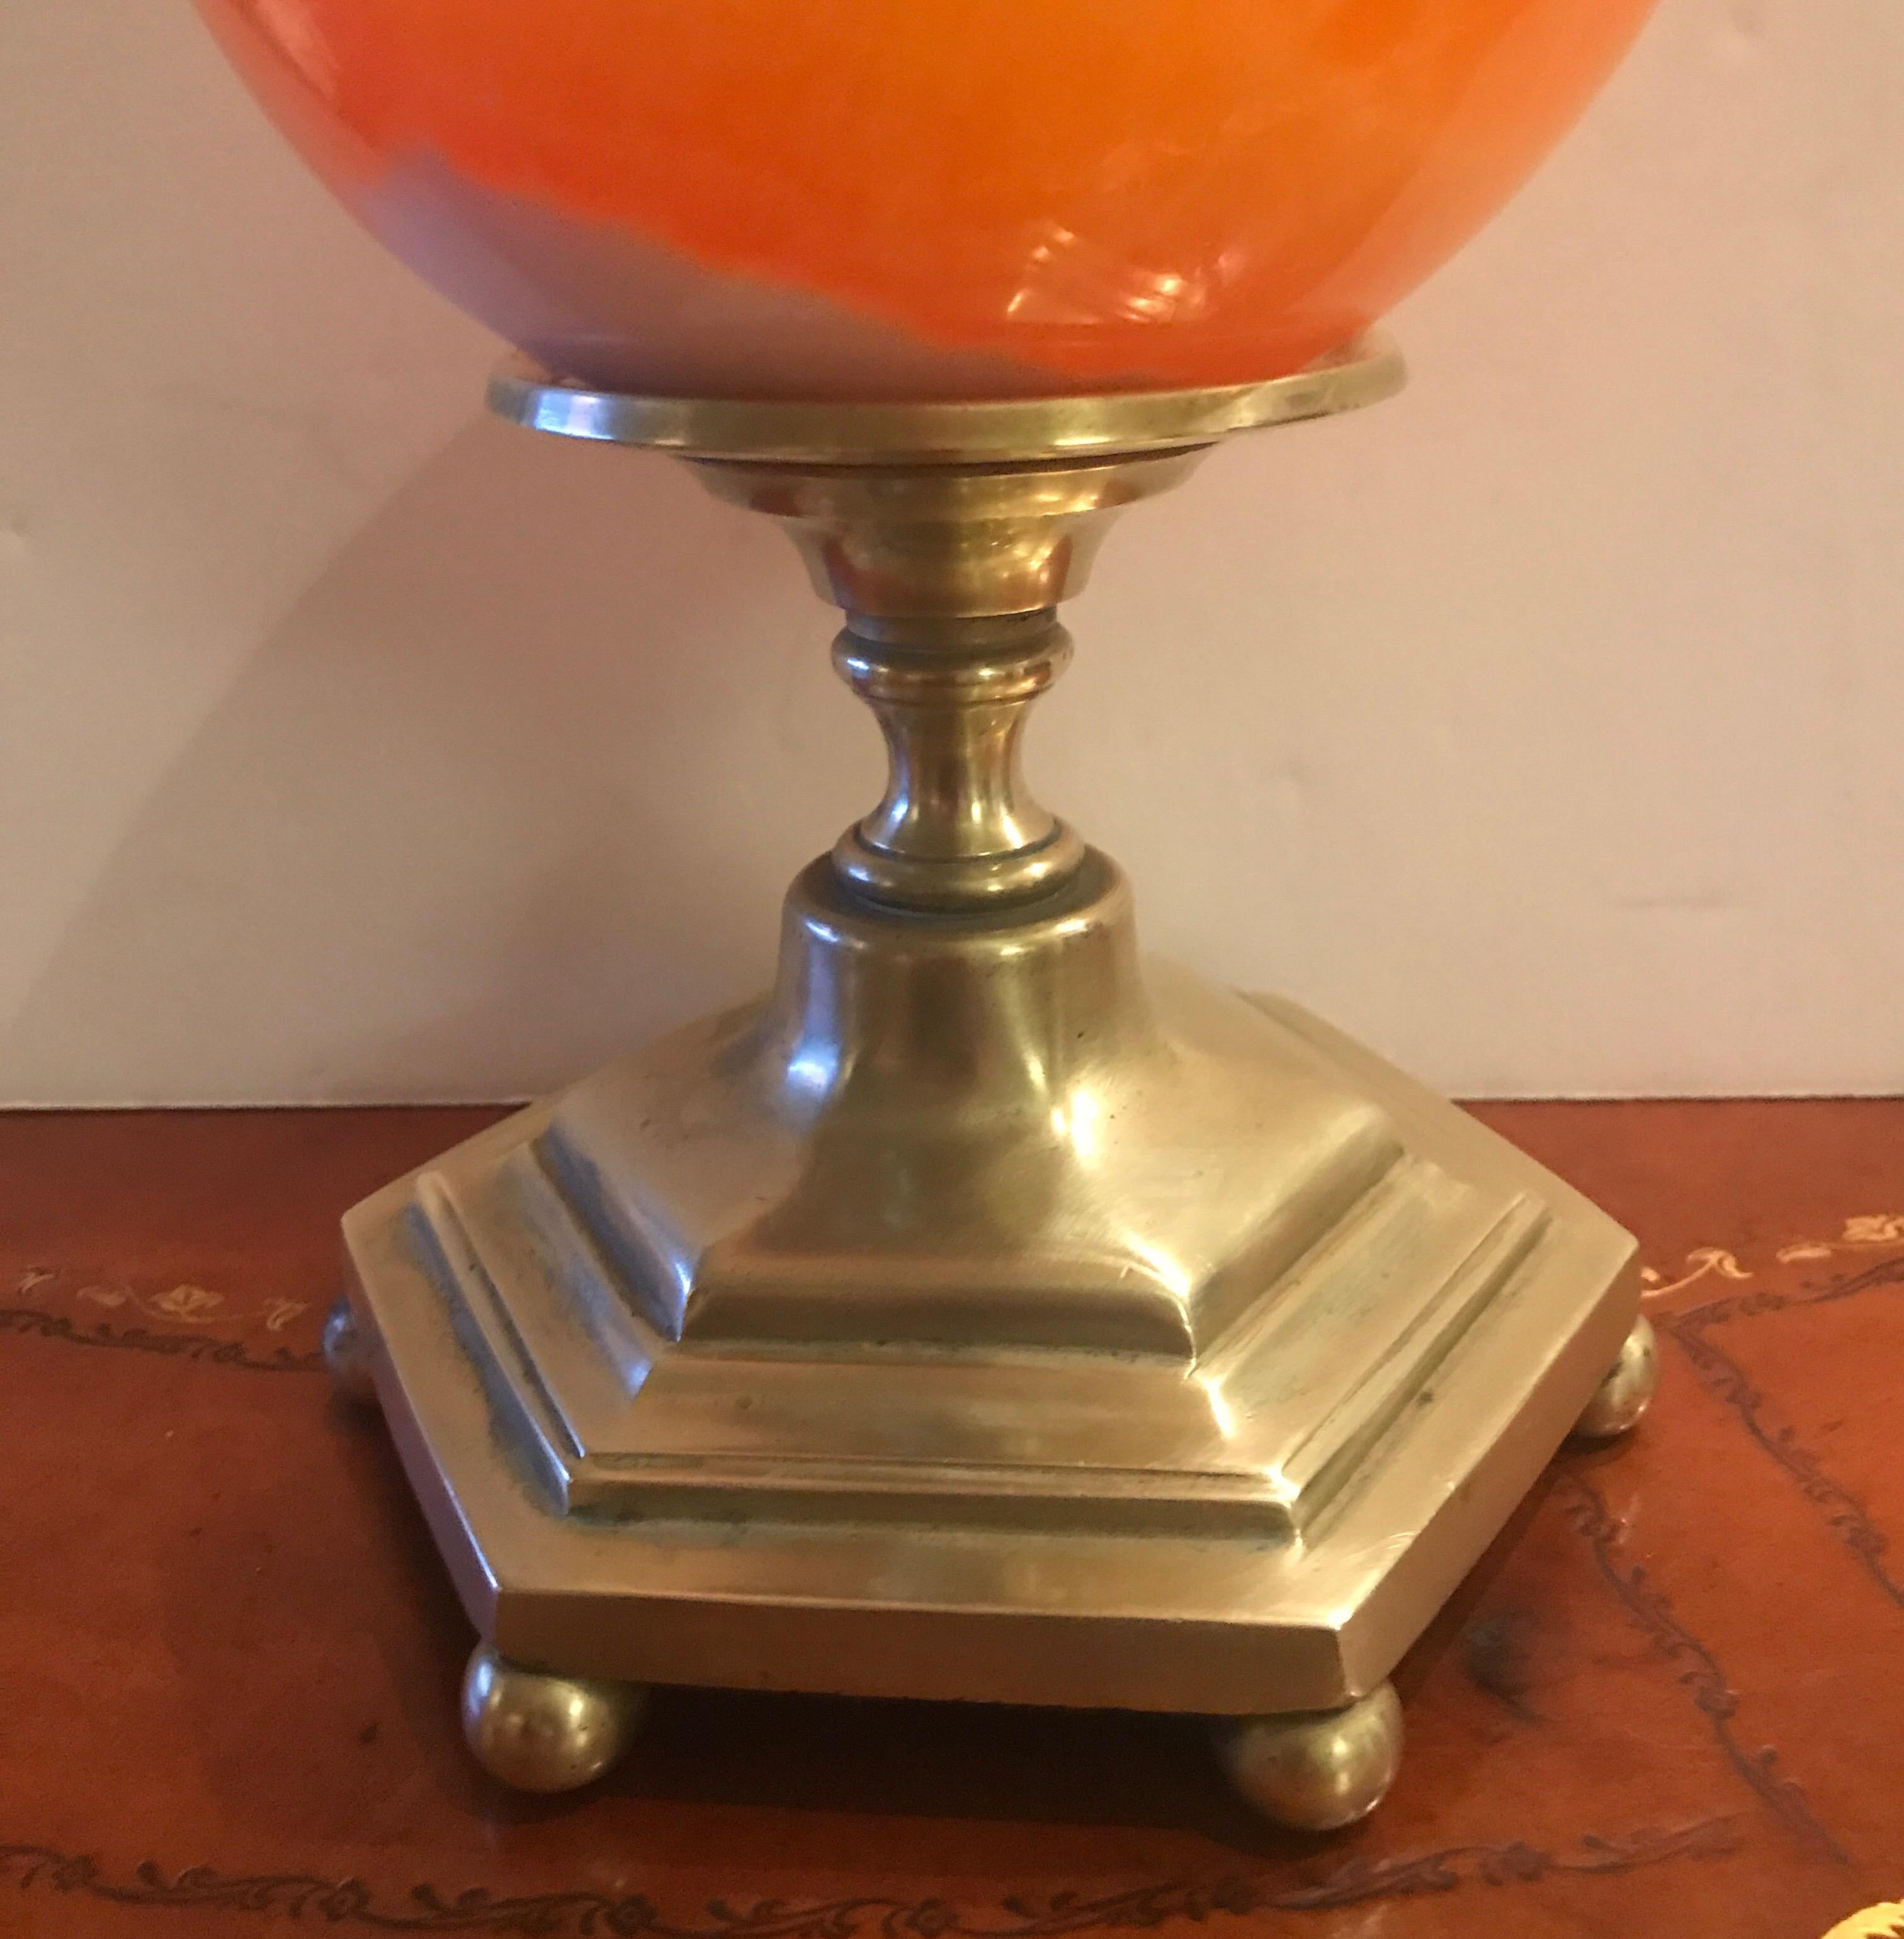 A polished agate sphere with case brass base. The melon colored sphere with white veining resting on a six sided cast brass base. The sphere is 6 inches in diameter and a full 10.5 inches tall on the stand.